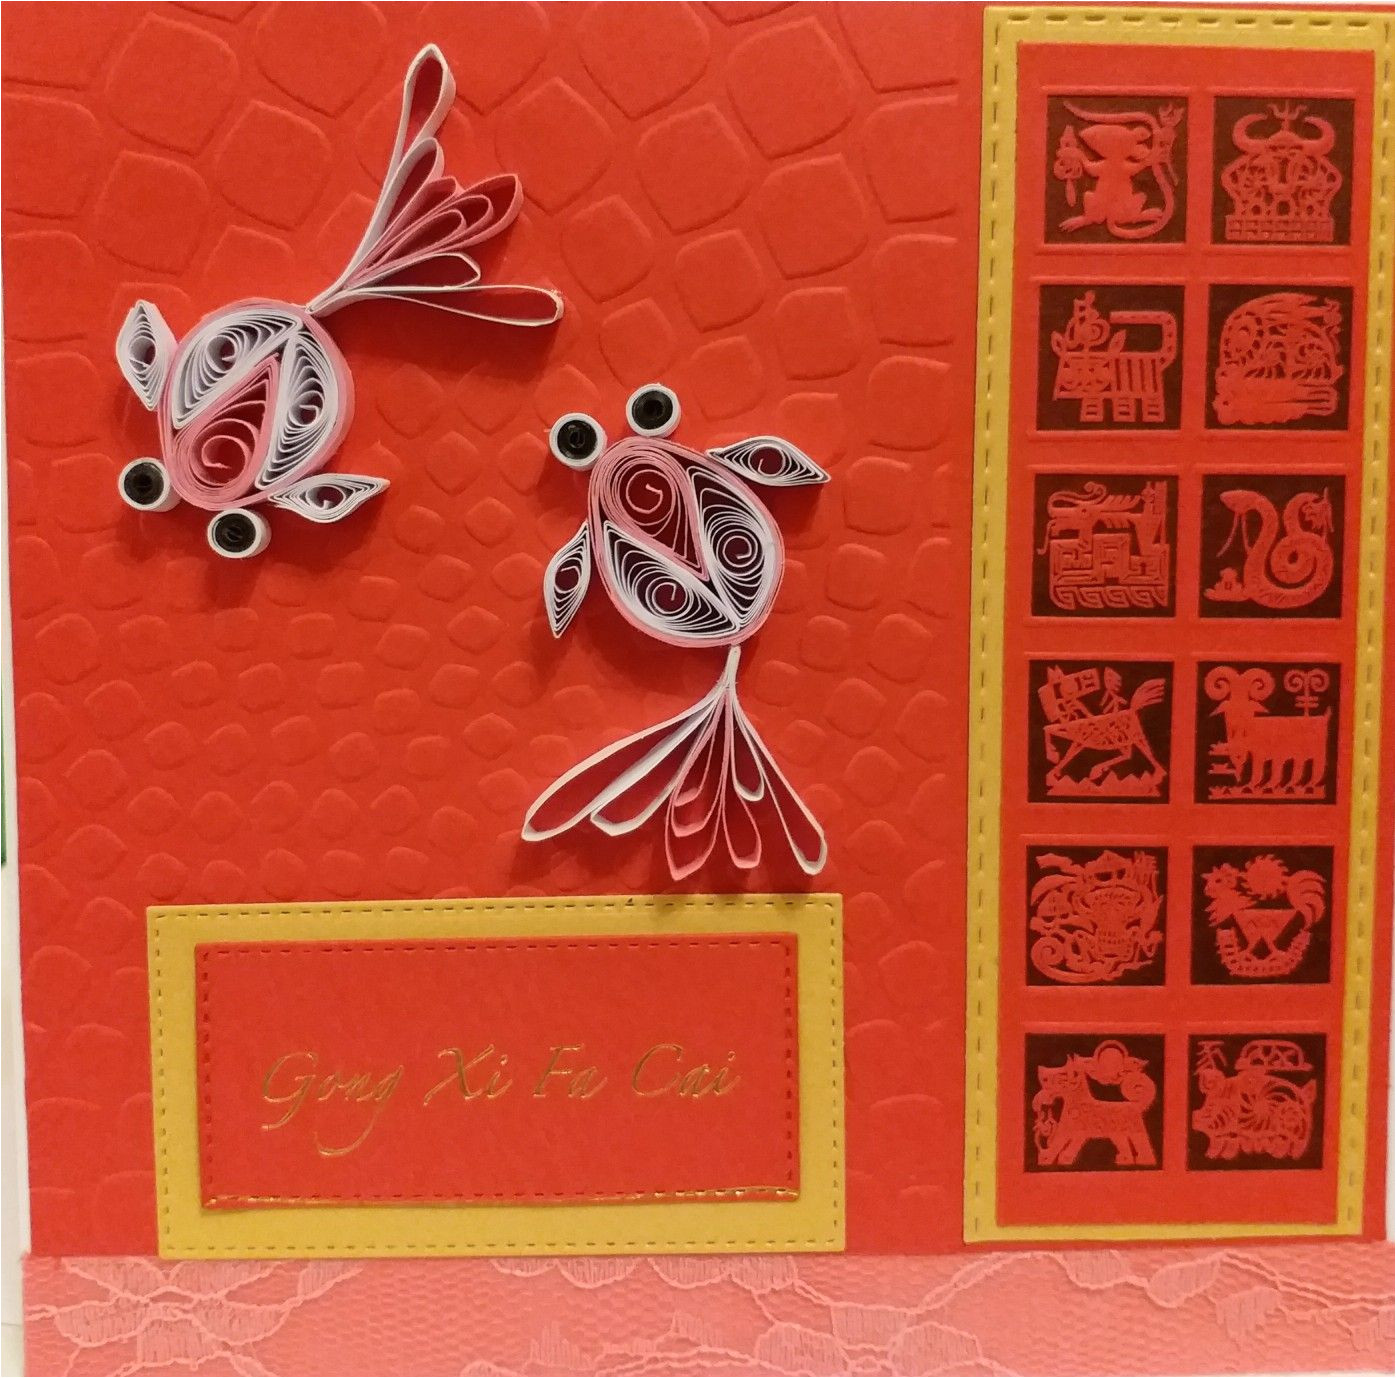 Diy Chinese New Year Card Chinese New Year Card with Images Quilling Work Chinese